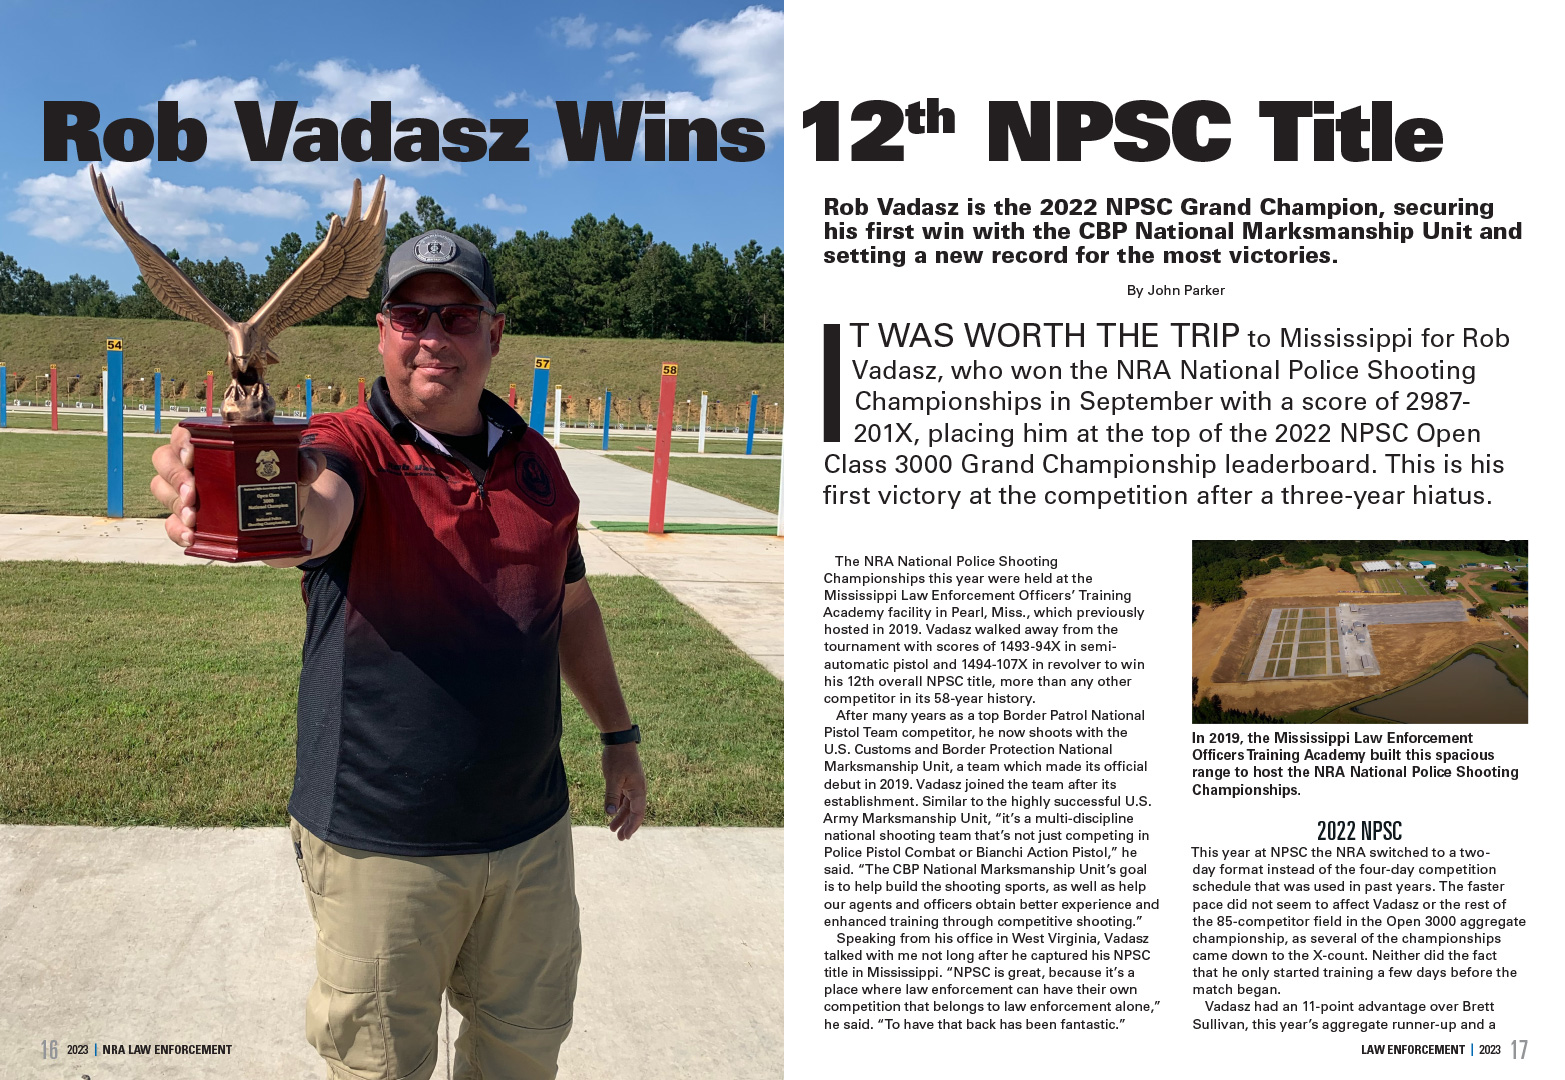 Rob Vadasz and 12th NPSC title